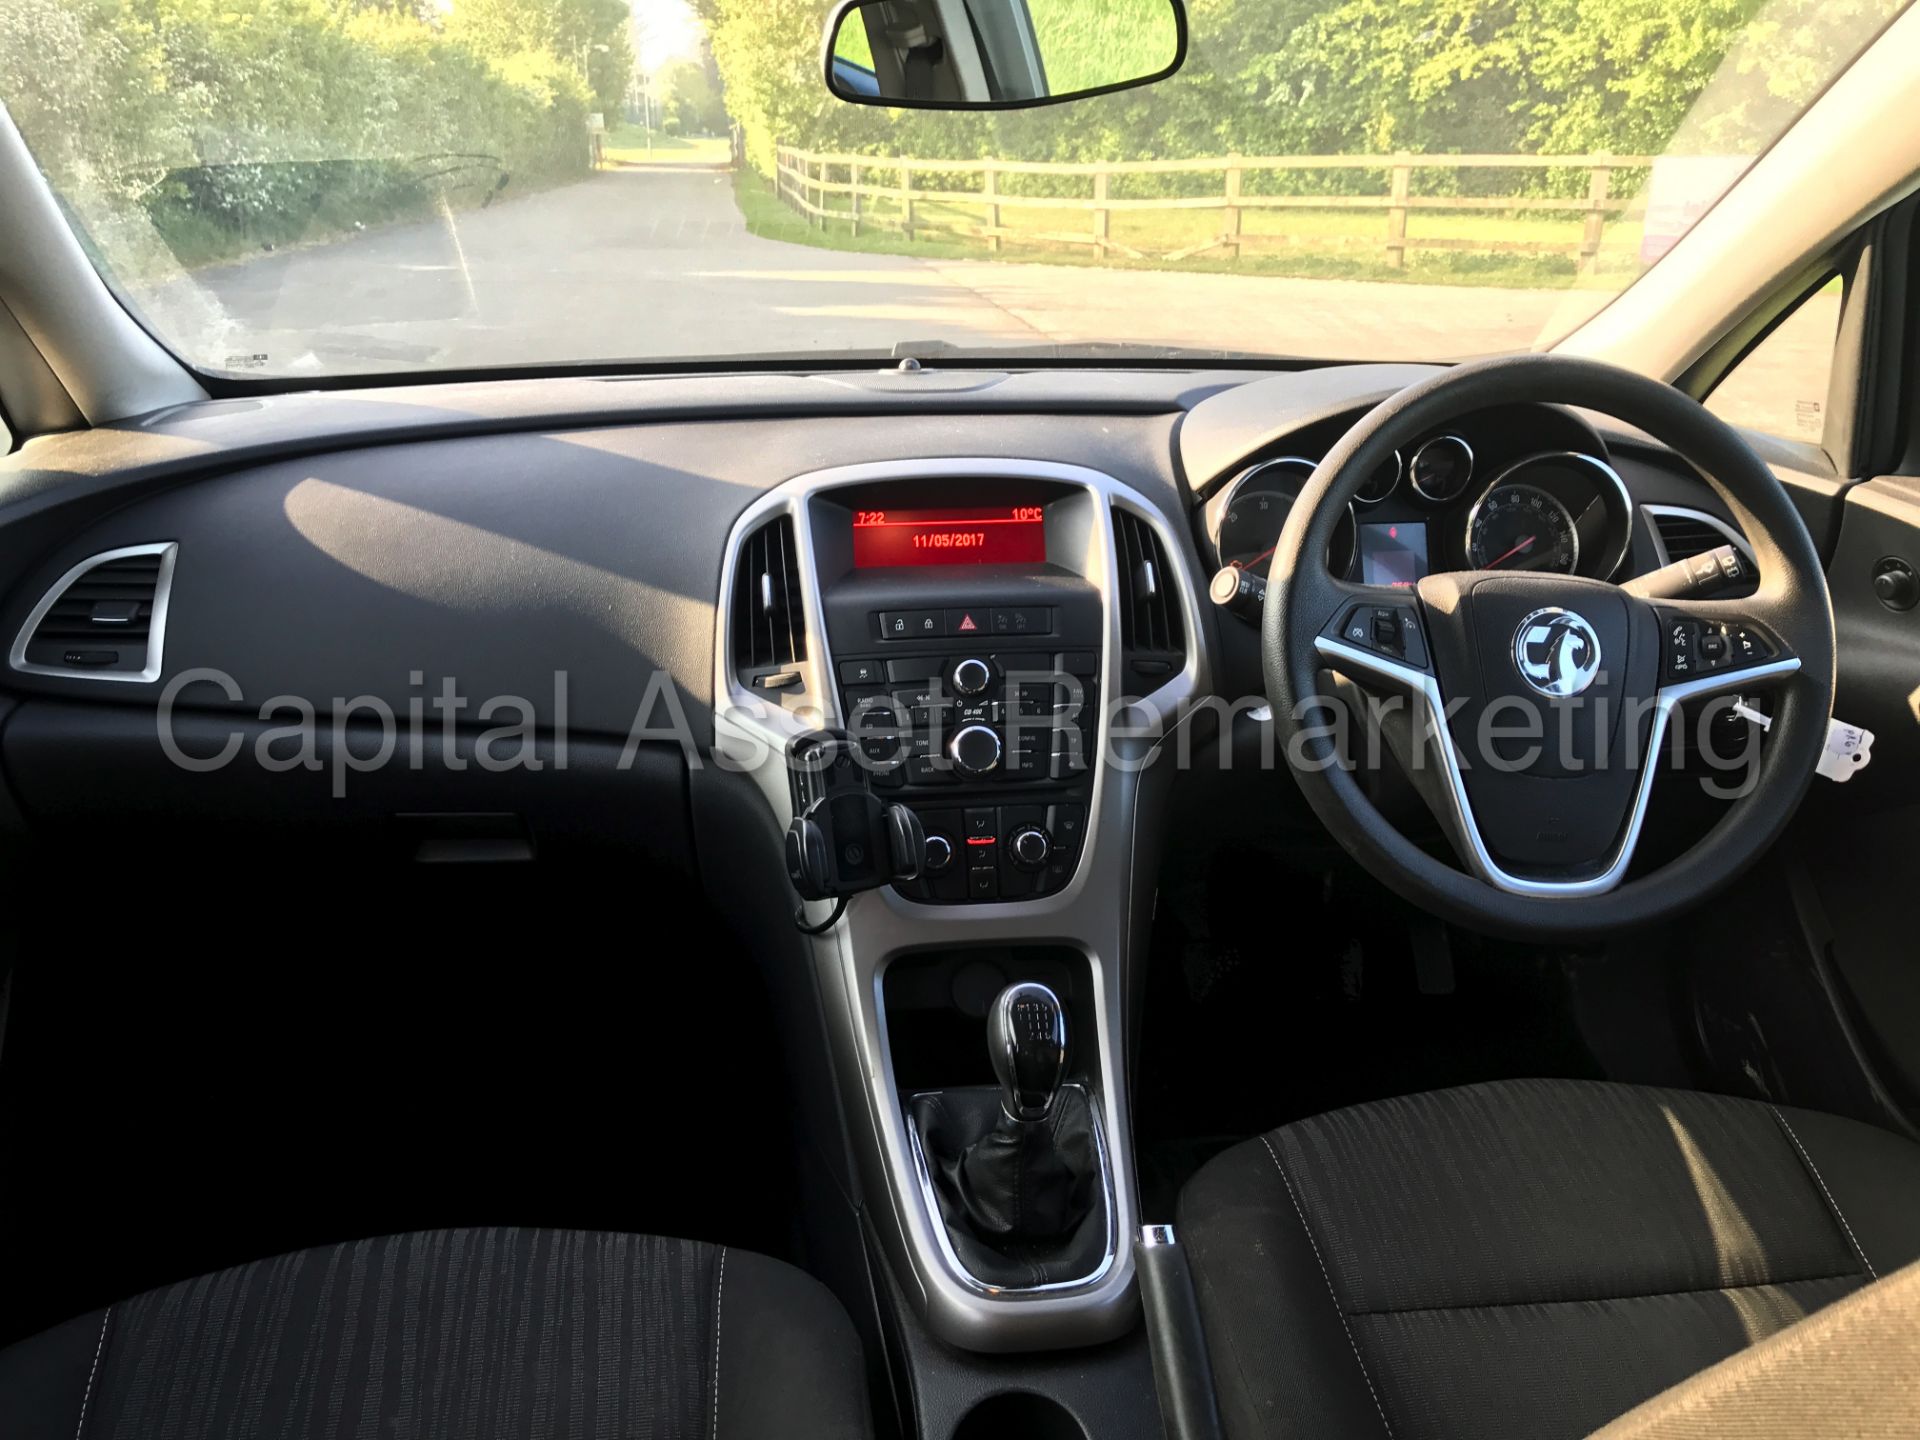 VAUXHALL ASTRA 'EXCLUSIVE' (2012 MODEL) '1.7 CDTI - ECOFLEX - 6 SPEED' *AIR CON* (1 OWNER) - Image 19 of 25